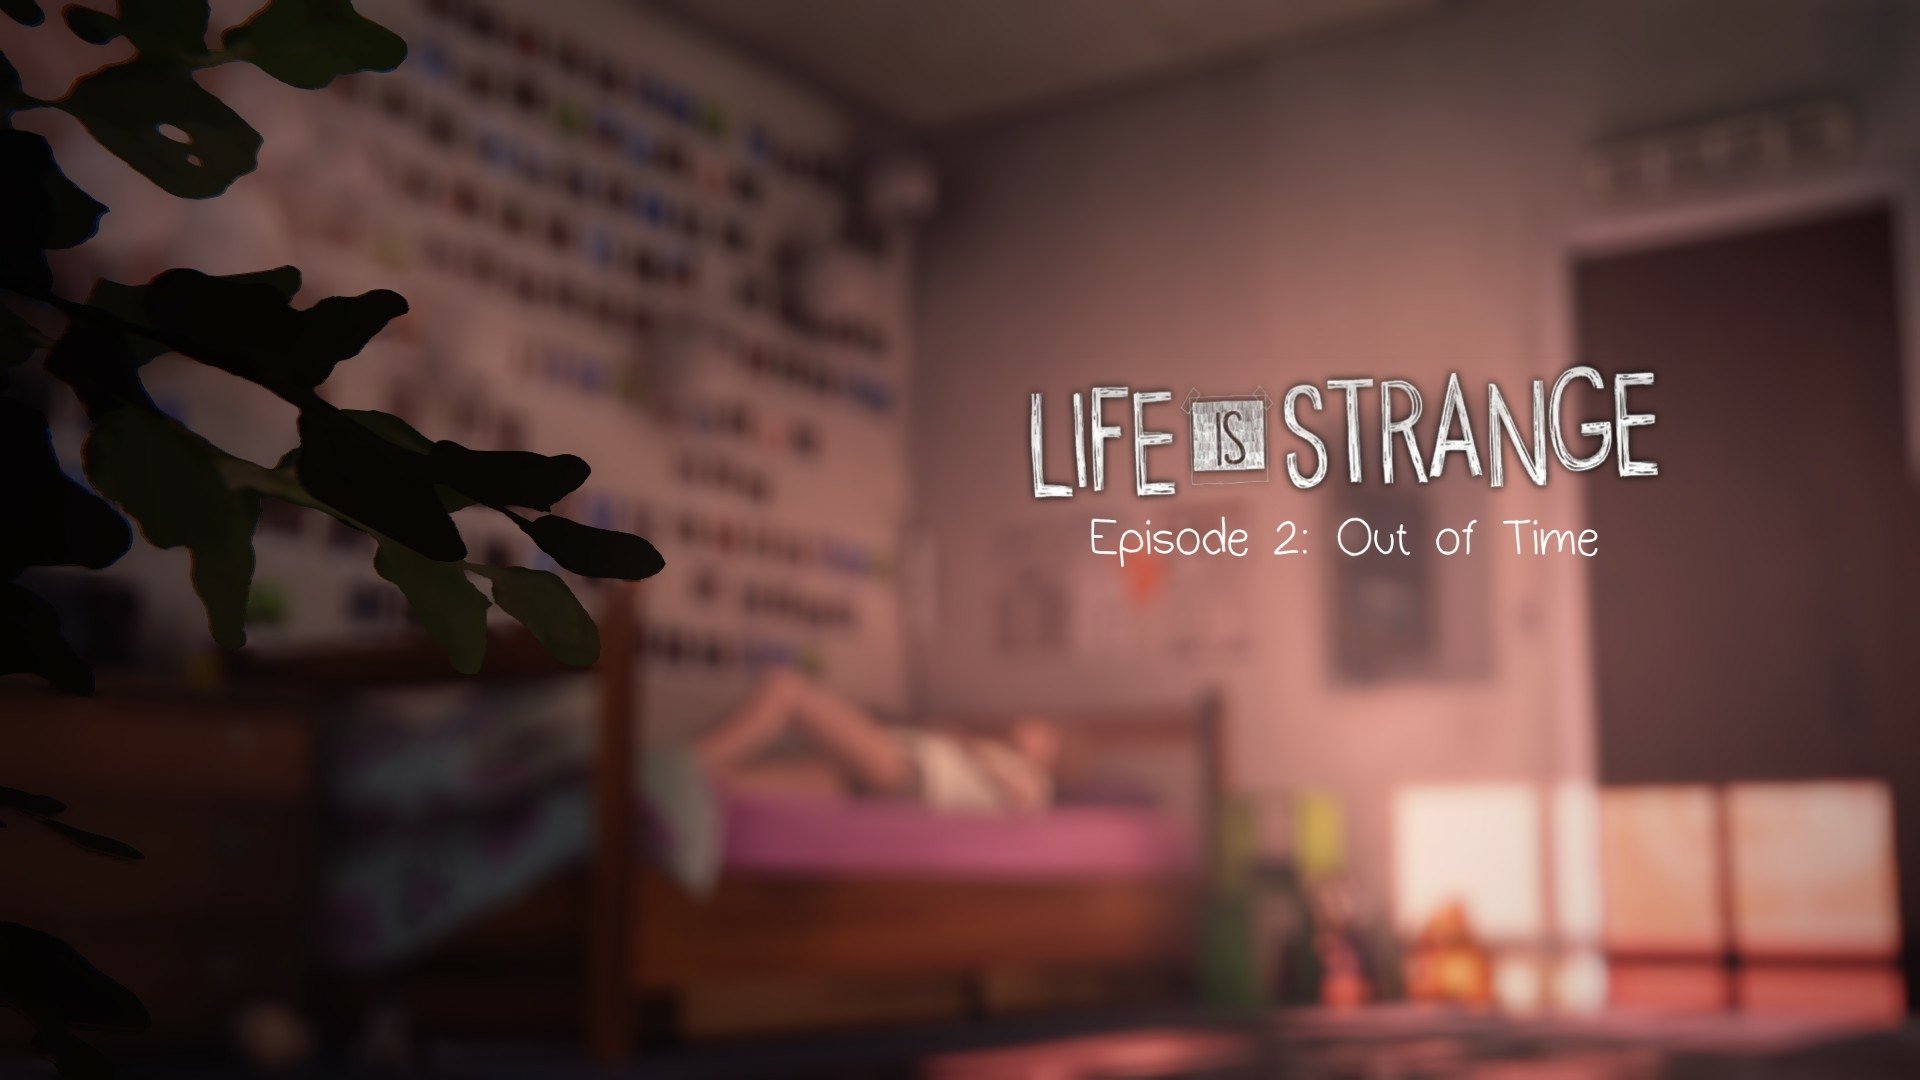 Life is strange спасти. Life is Strange эпизоды. Life is Strange 1 эпизод. Life is Strange 2 1 эпизод. Life is Strange Episode 2 out of time.